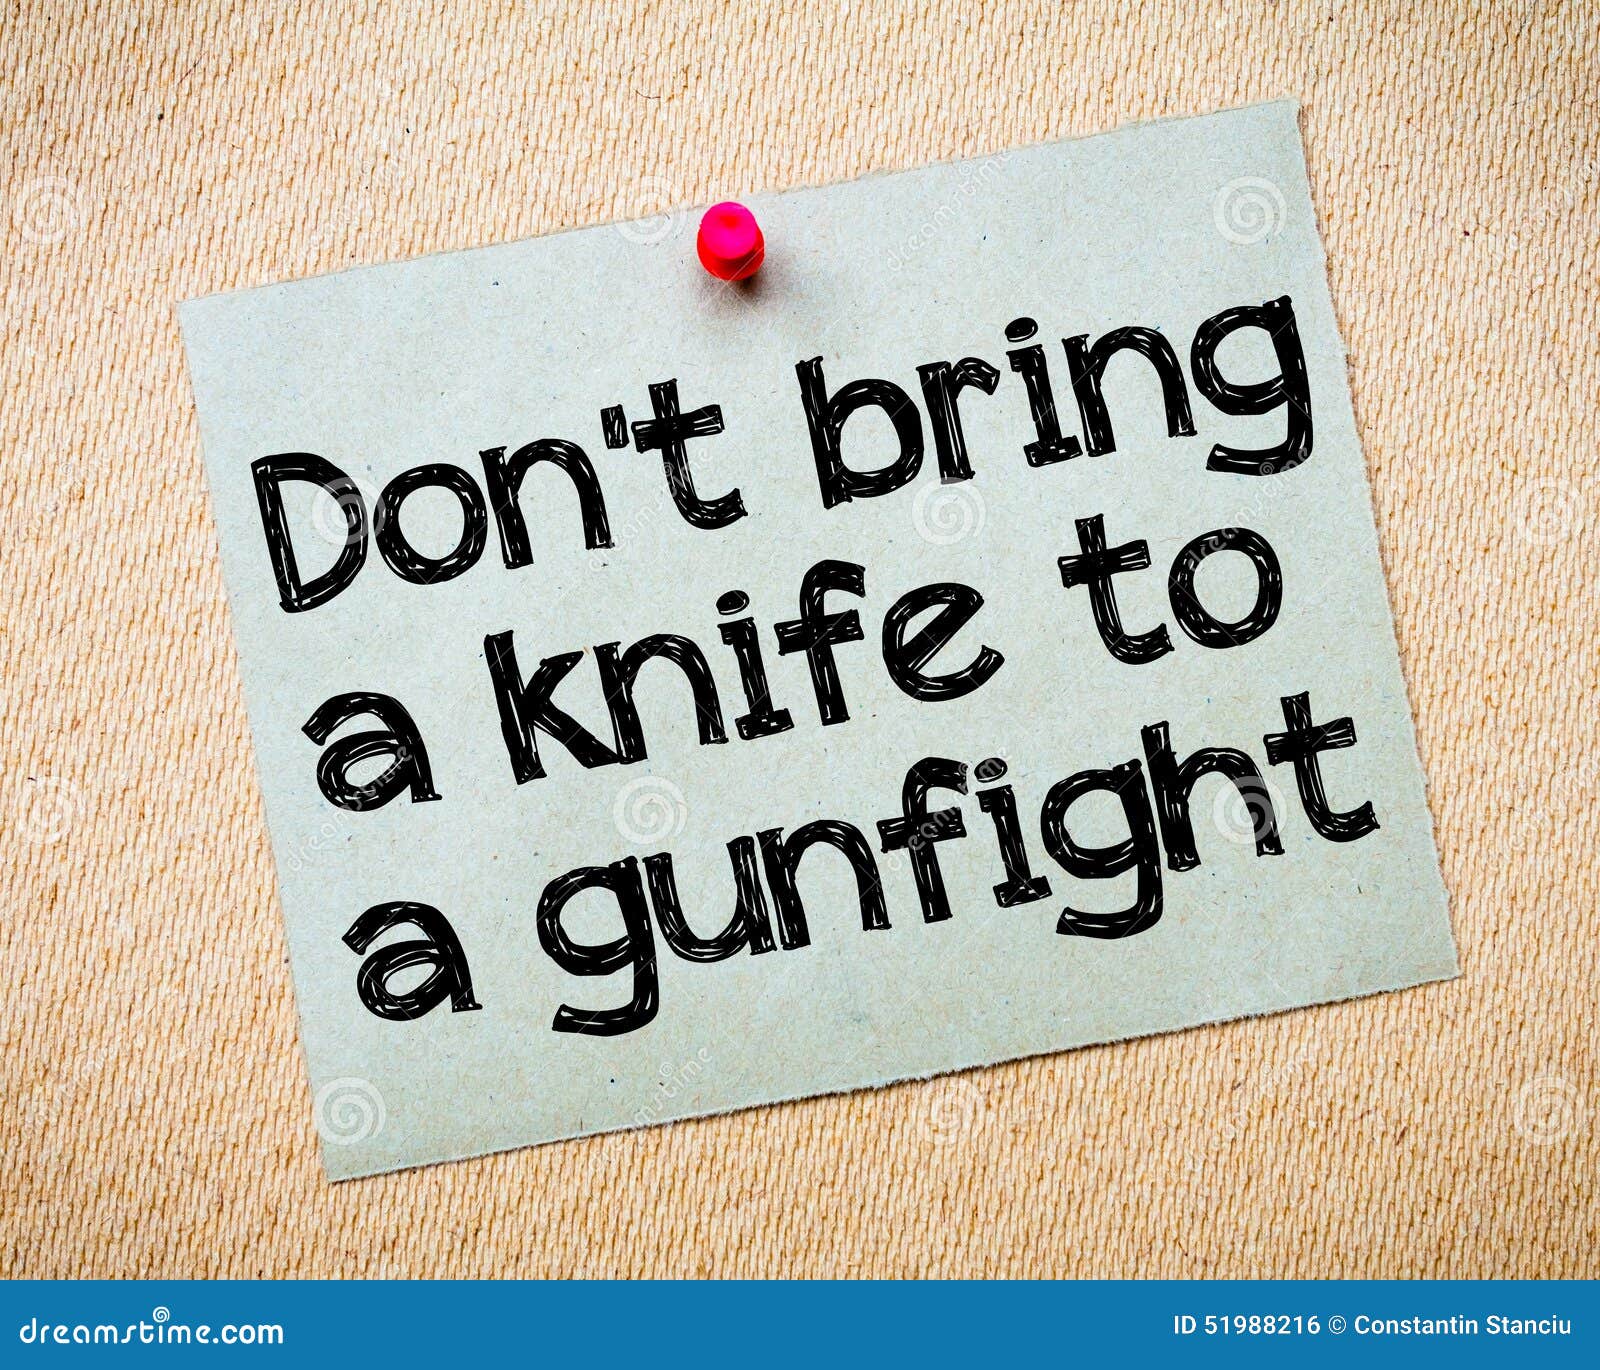 don-t-bring-knife-to-gunfight-message-recycled-paper-note-pinned-cork-board-concept-image-51988216.jpg